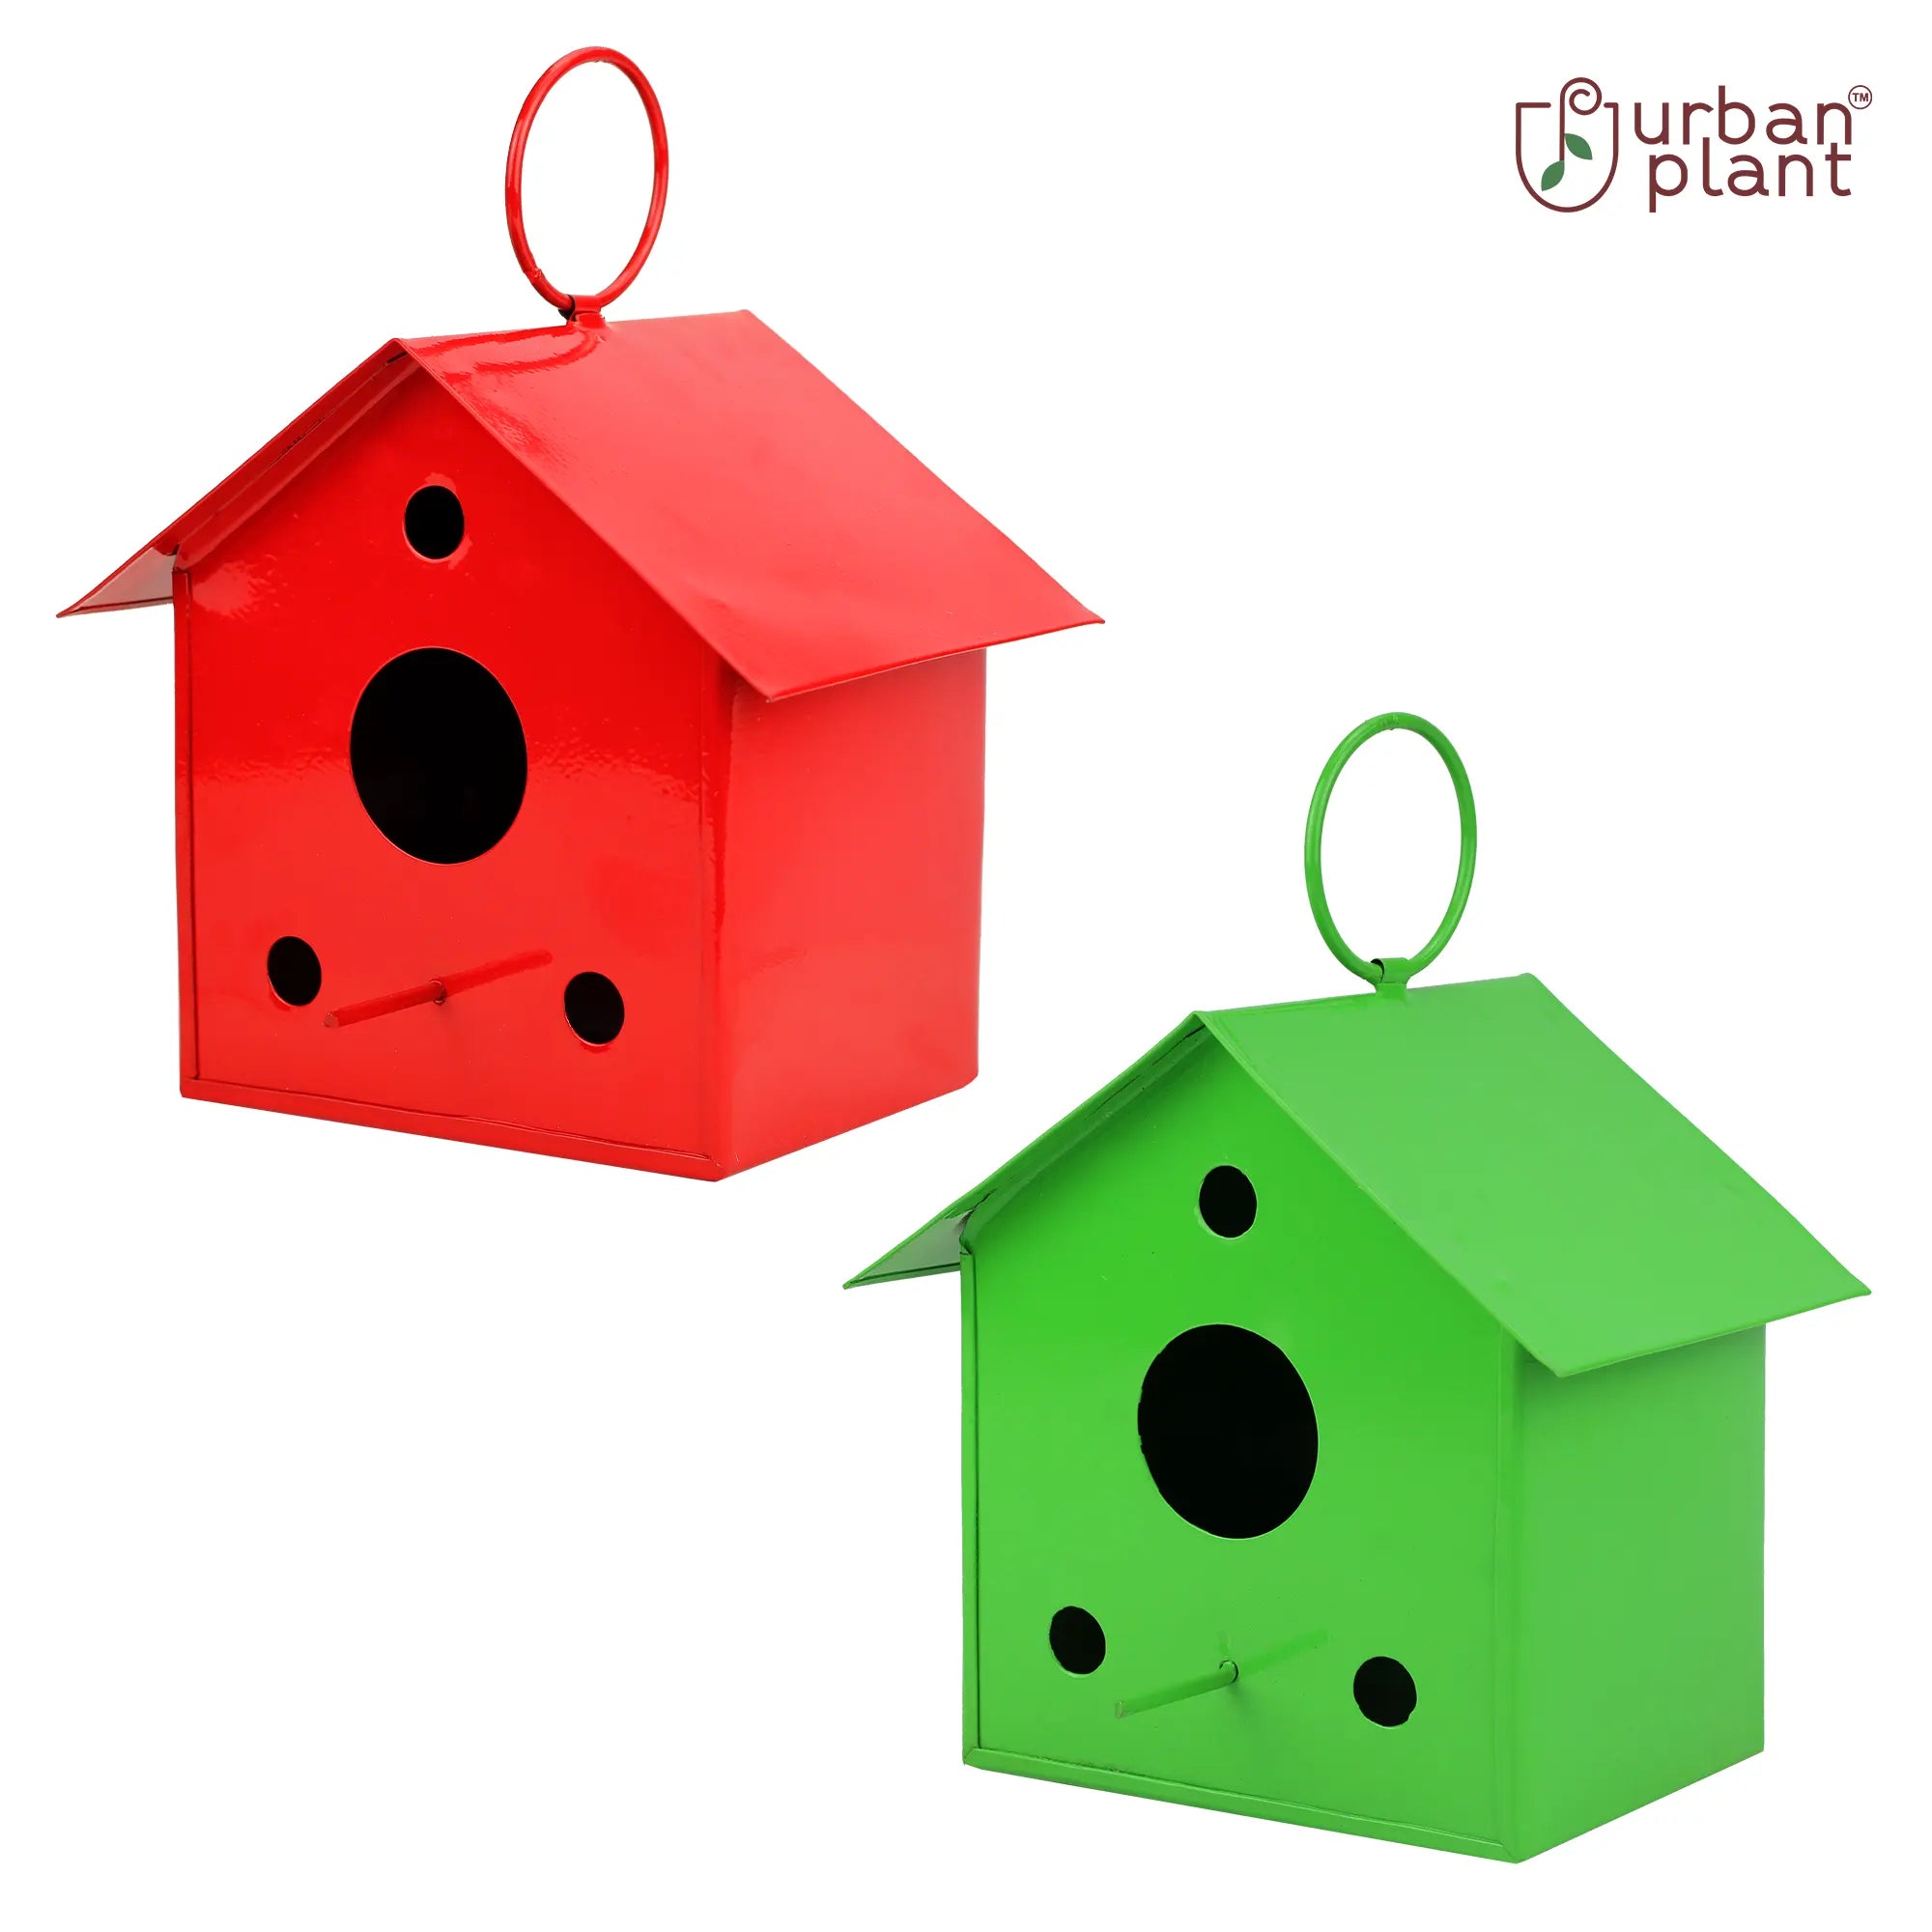 Colorful Metal Hanging Bird House Combo (Red & Green) Bird House Urban Plant 